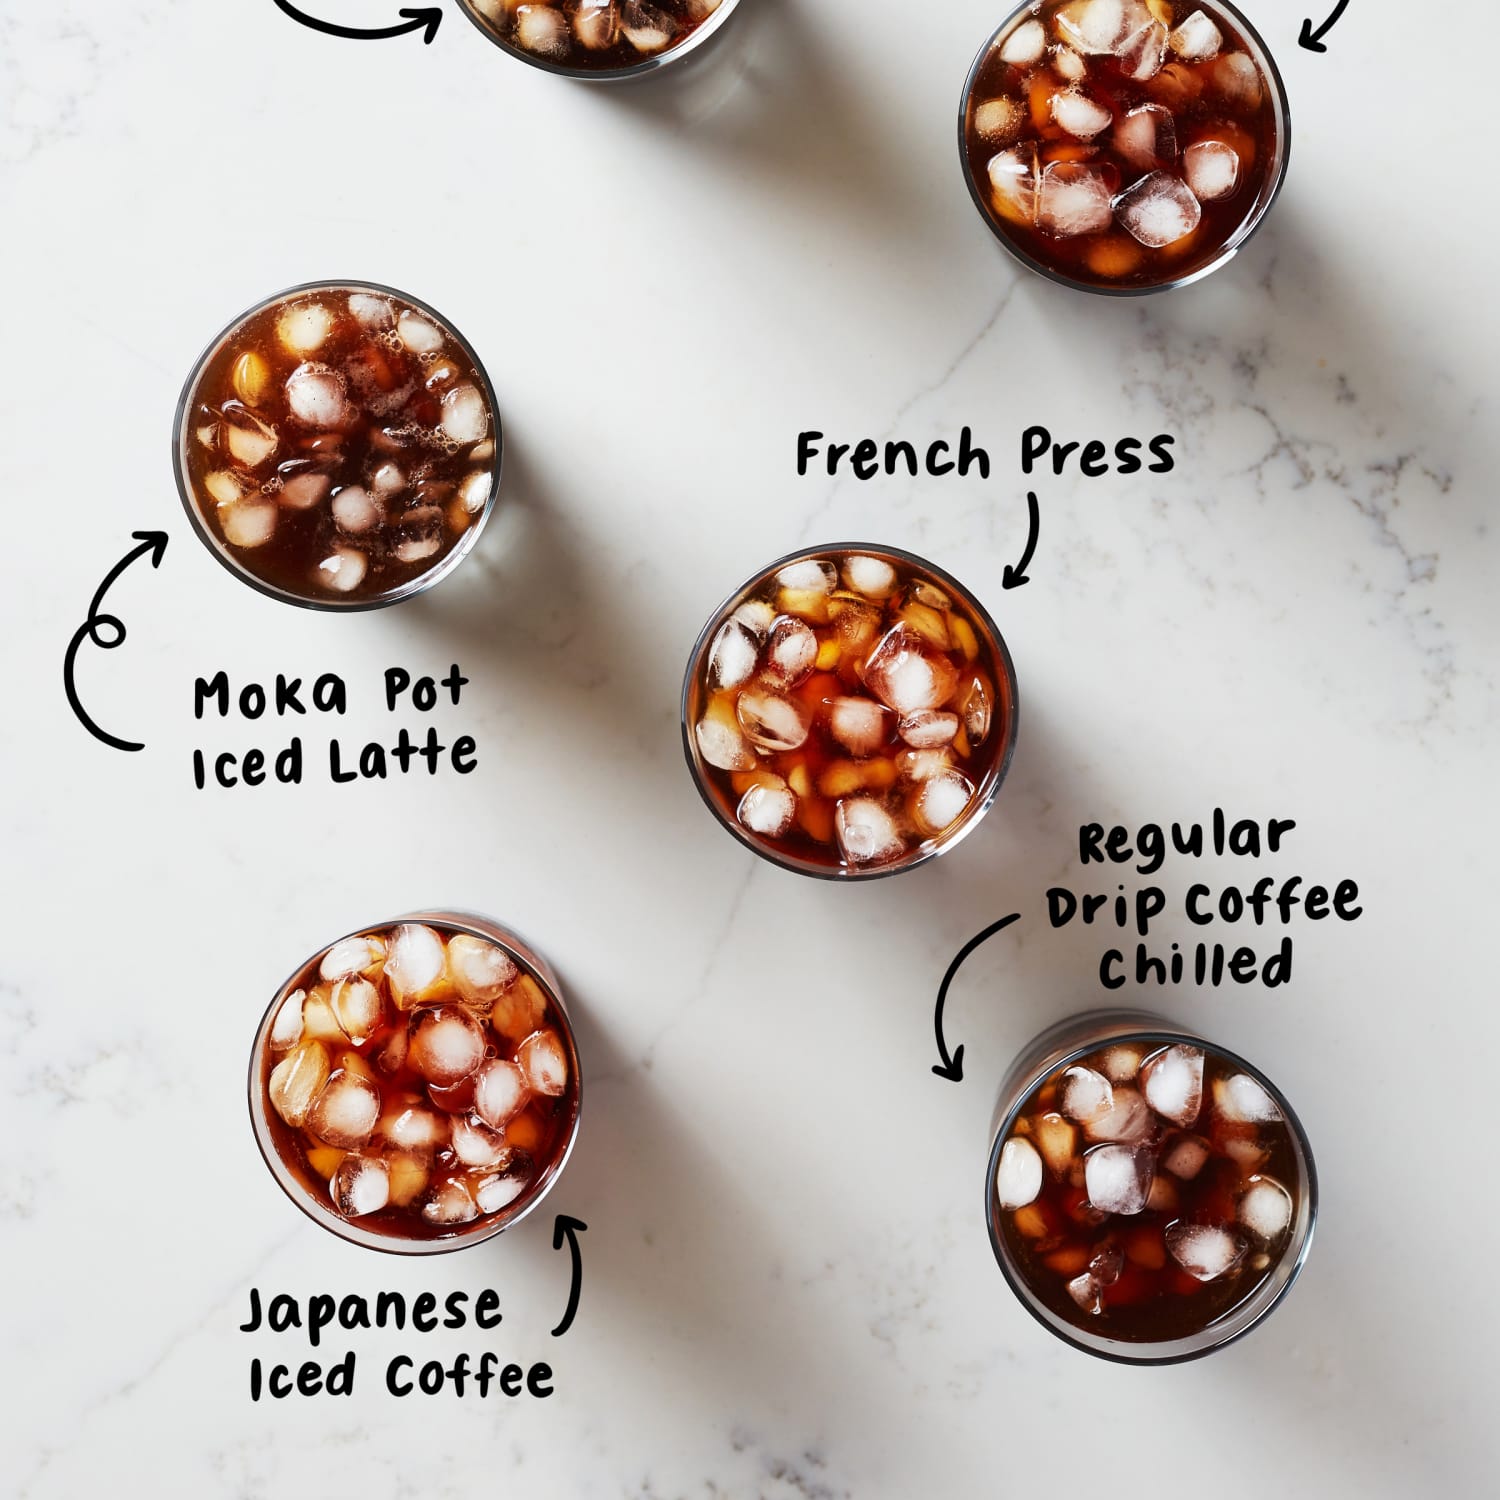 Best Way to Make Iced Coffee at Home